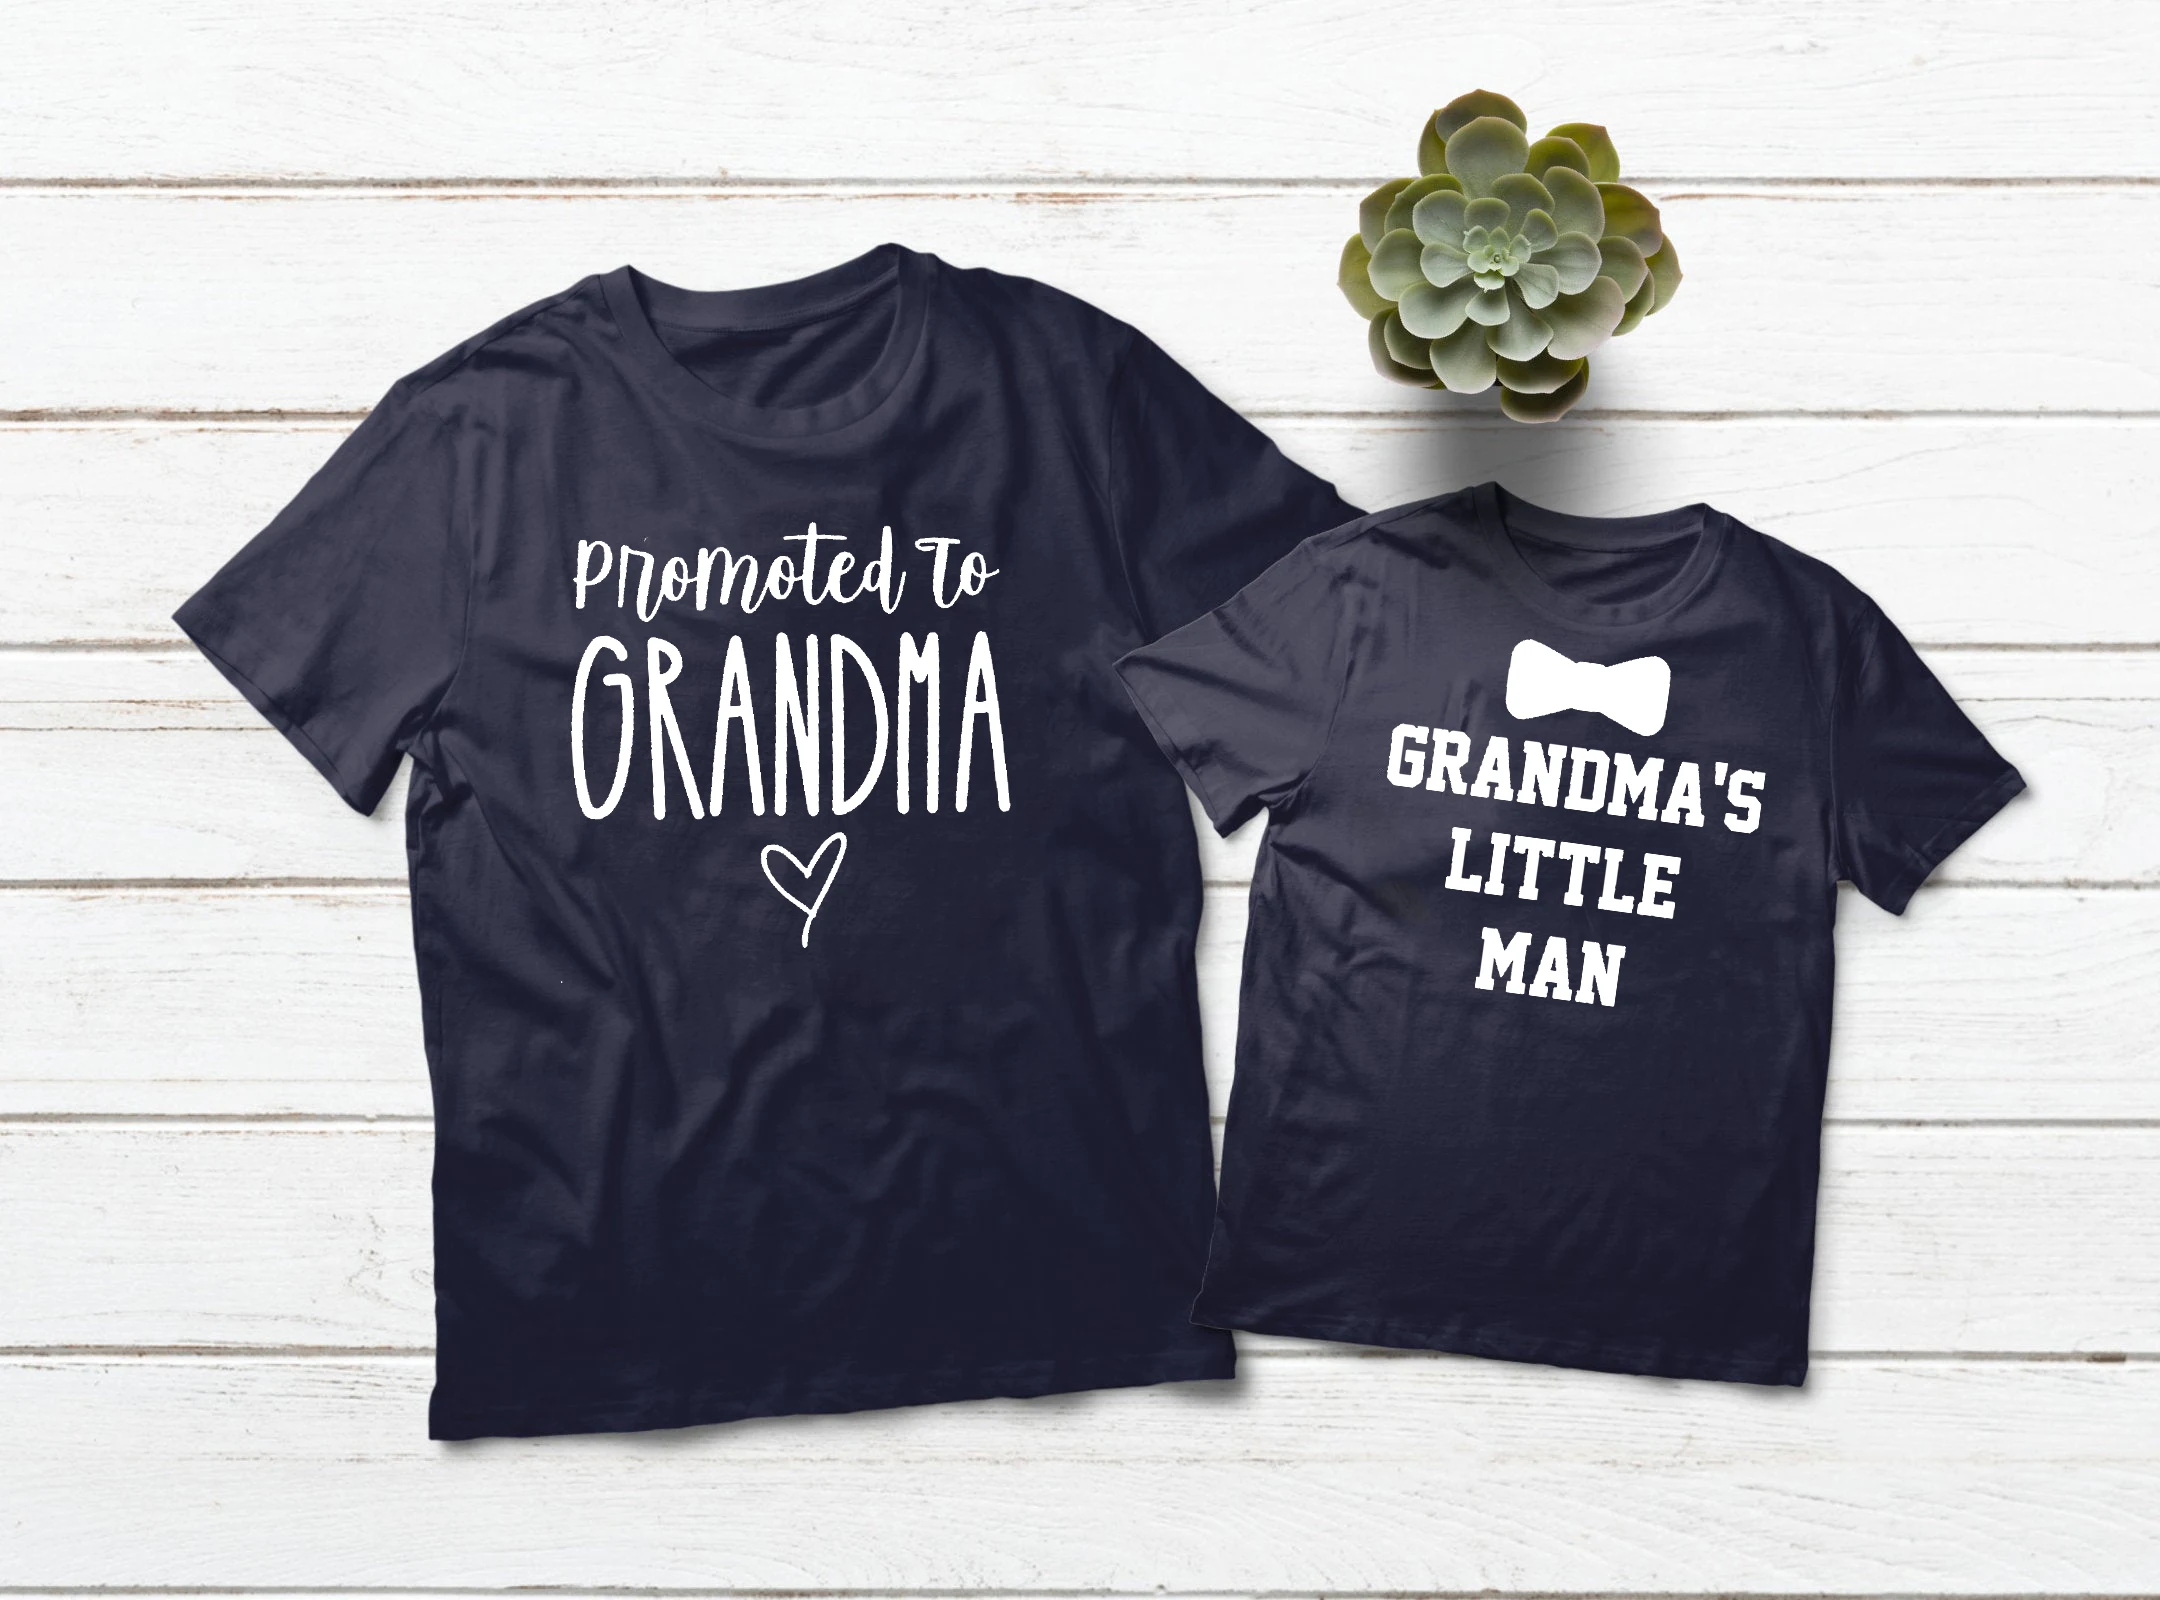 Promoted to be Grandma T-Shirts